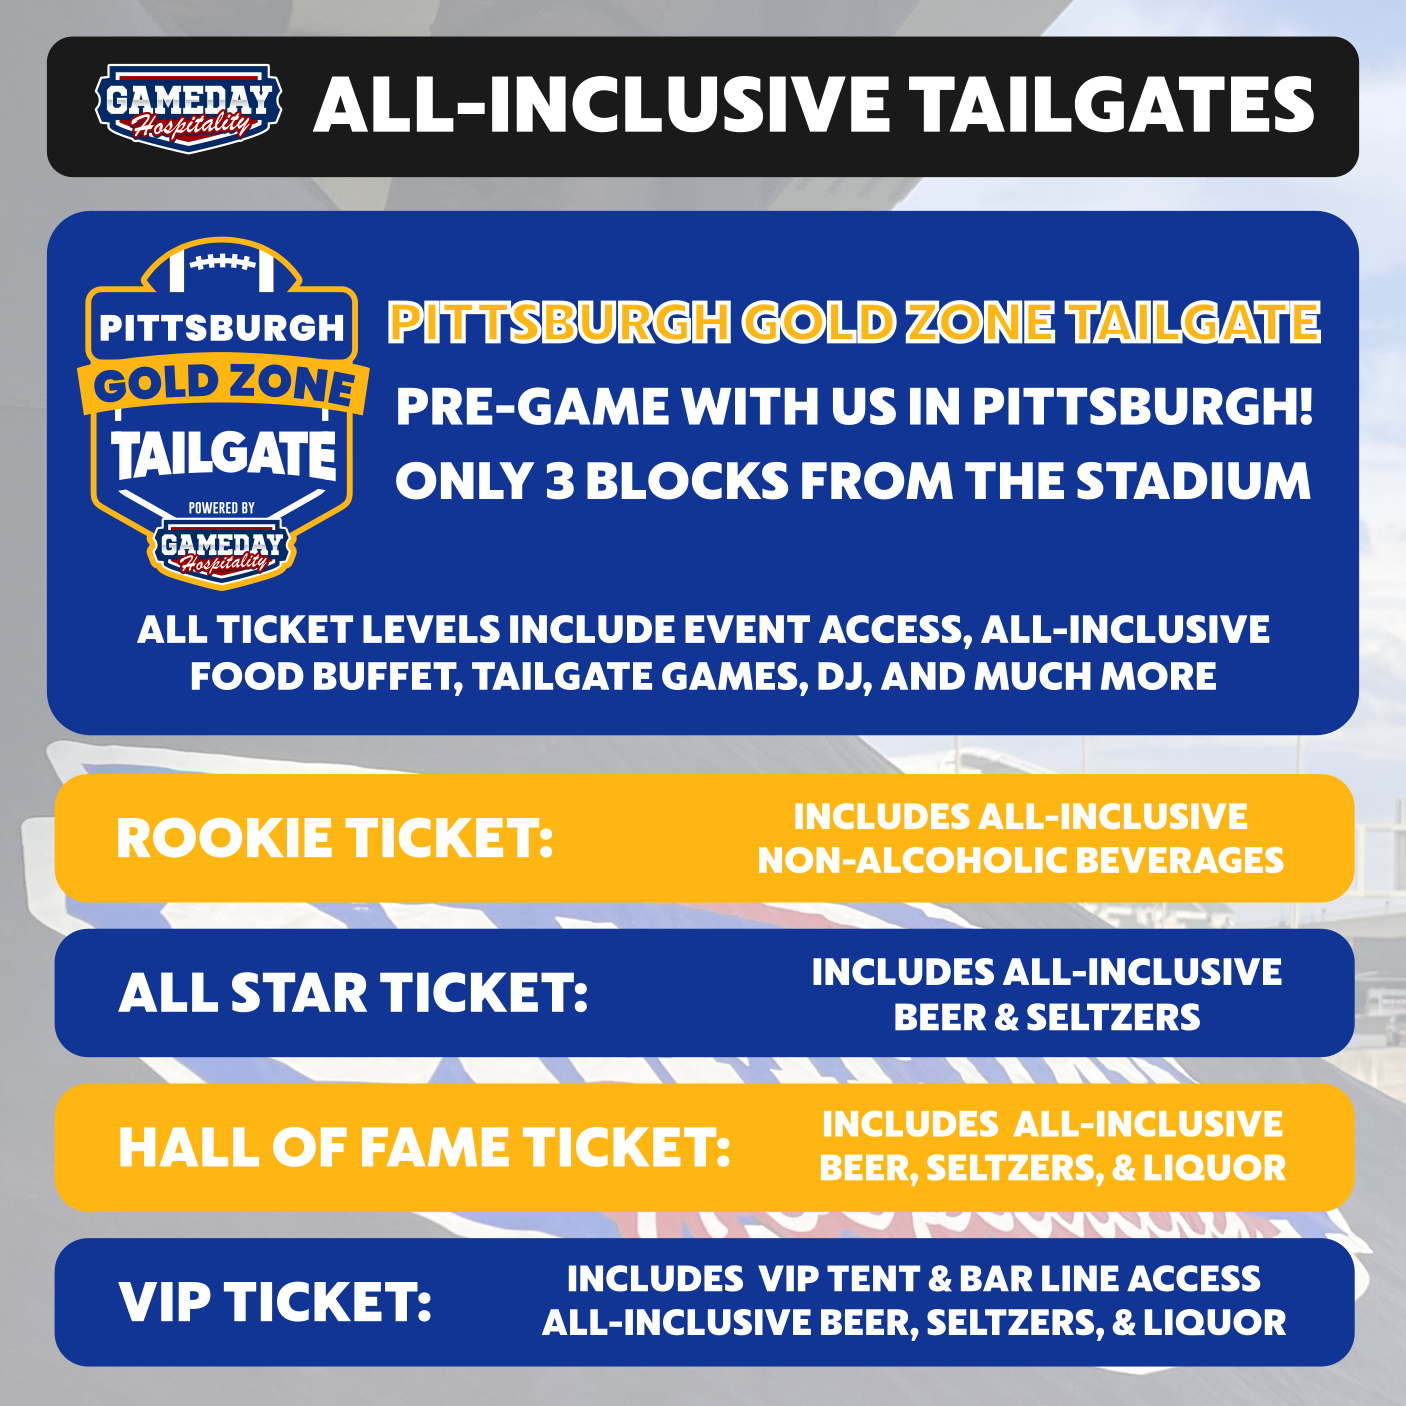 Gameday Hospitality - Pittsburgh Pitt Panthers Tailgate Seating Chart